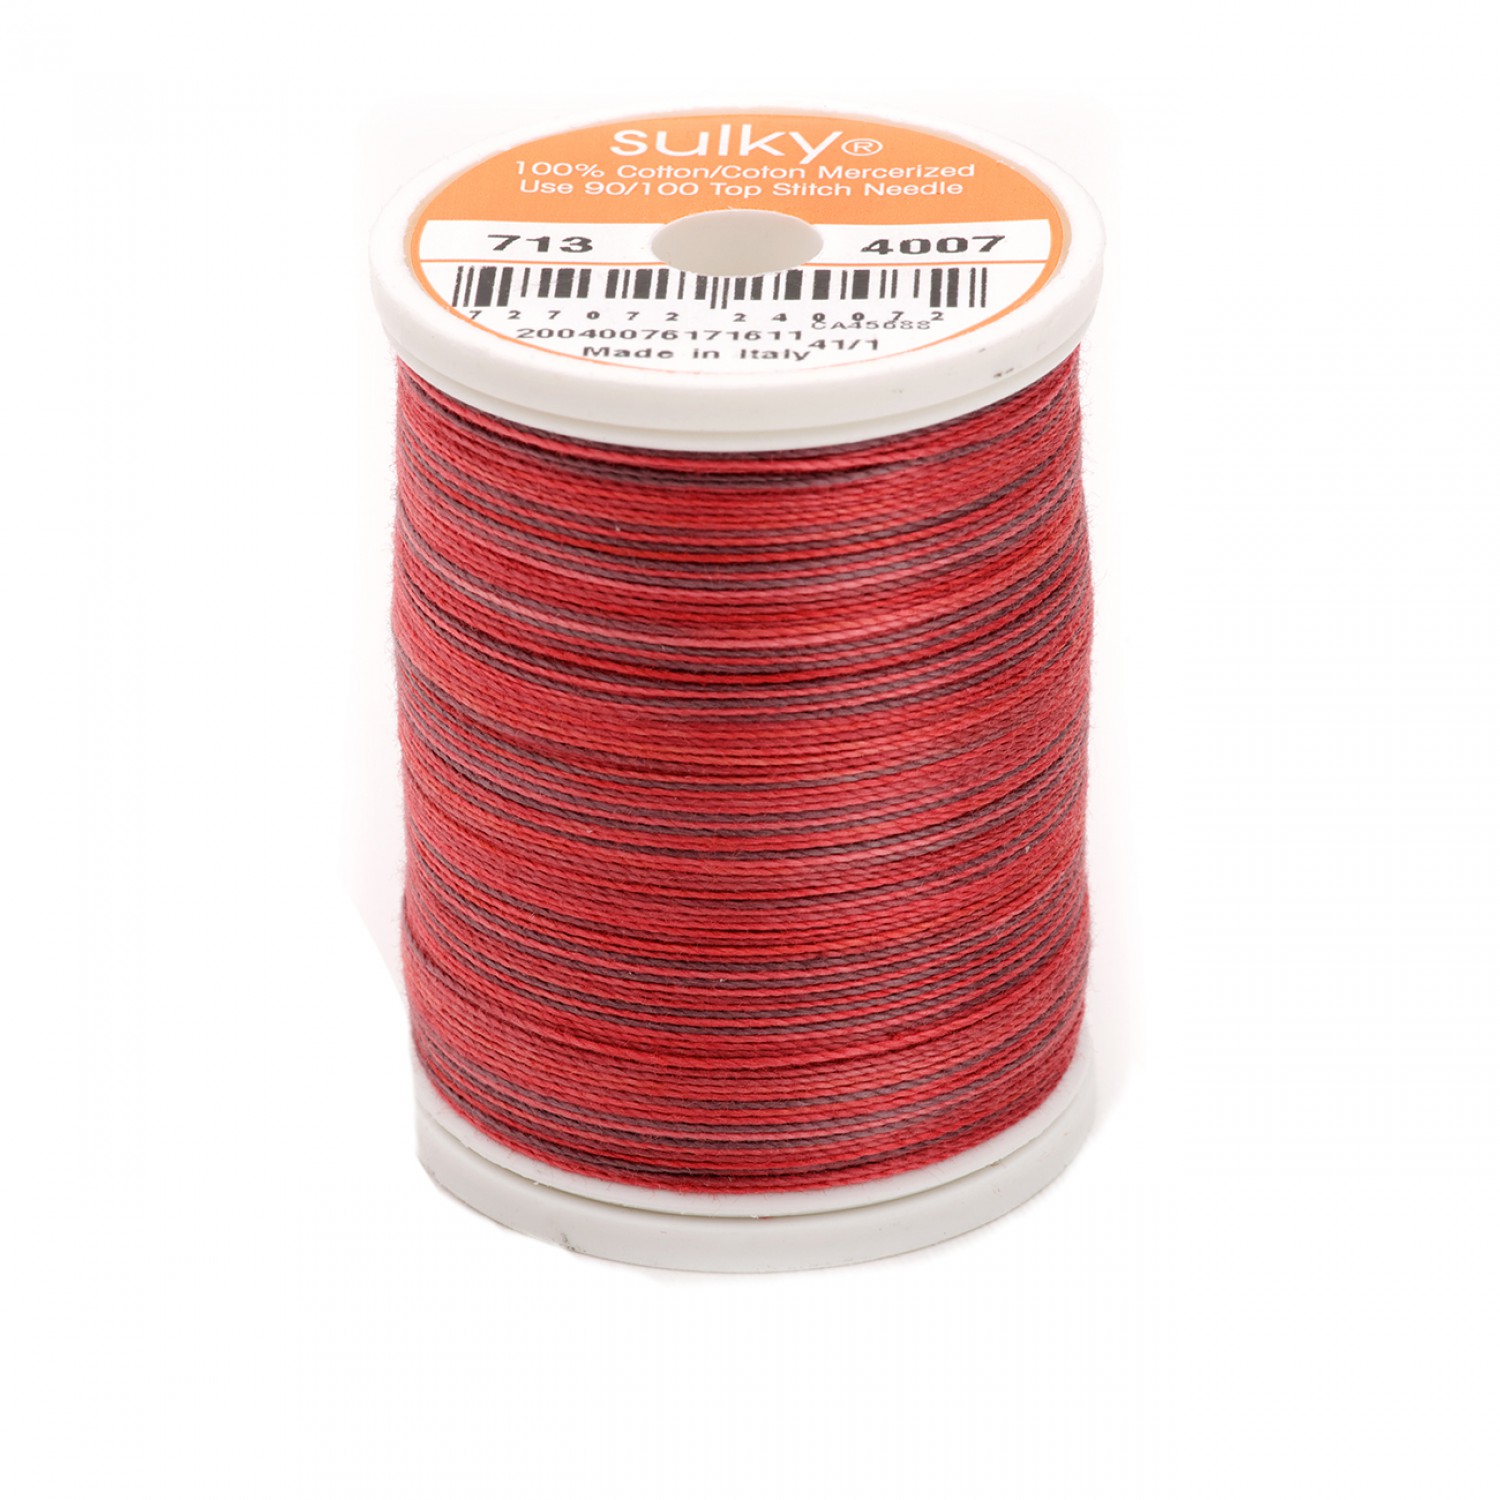 Sulky Blendables Cotton - Red Brick 330 yards